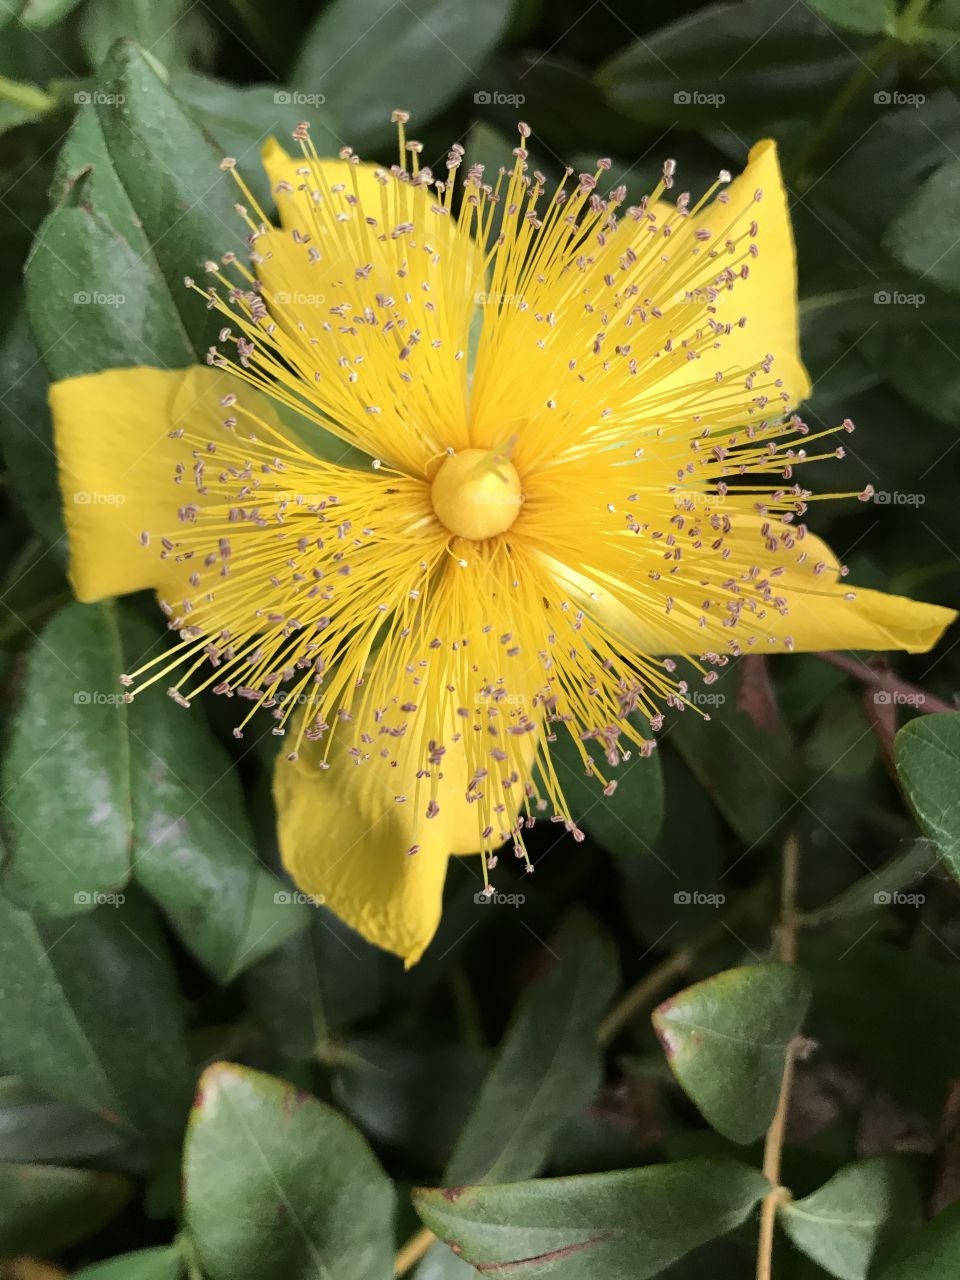 A blooming flower that I managed to capture